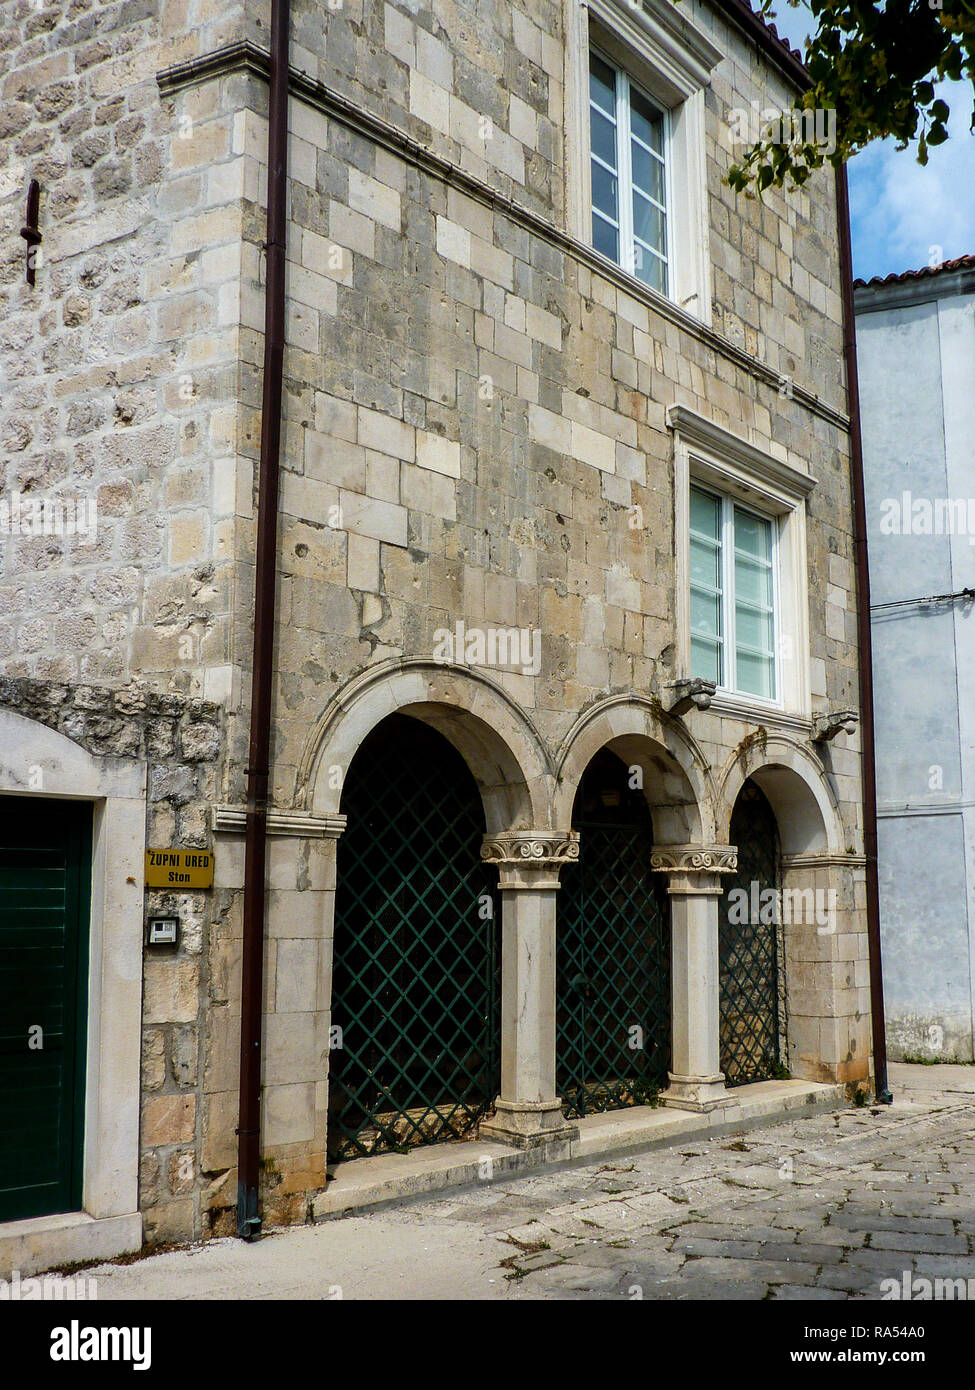 Building with ground floor arches in Ston, Croatia, home to the Lapidarium in the former Bishop's Palace Stock Photo